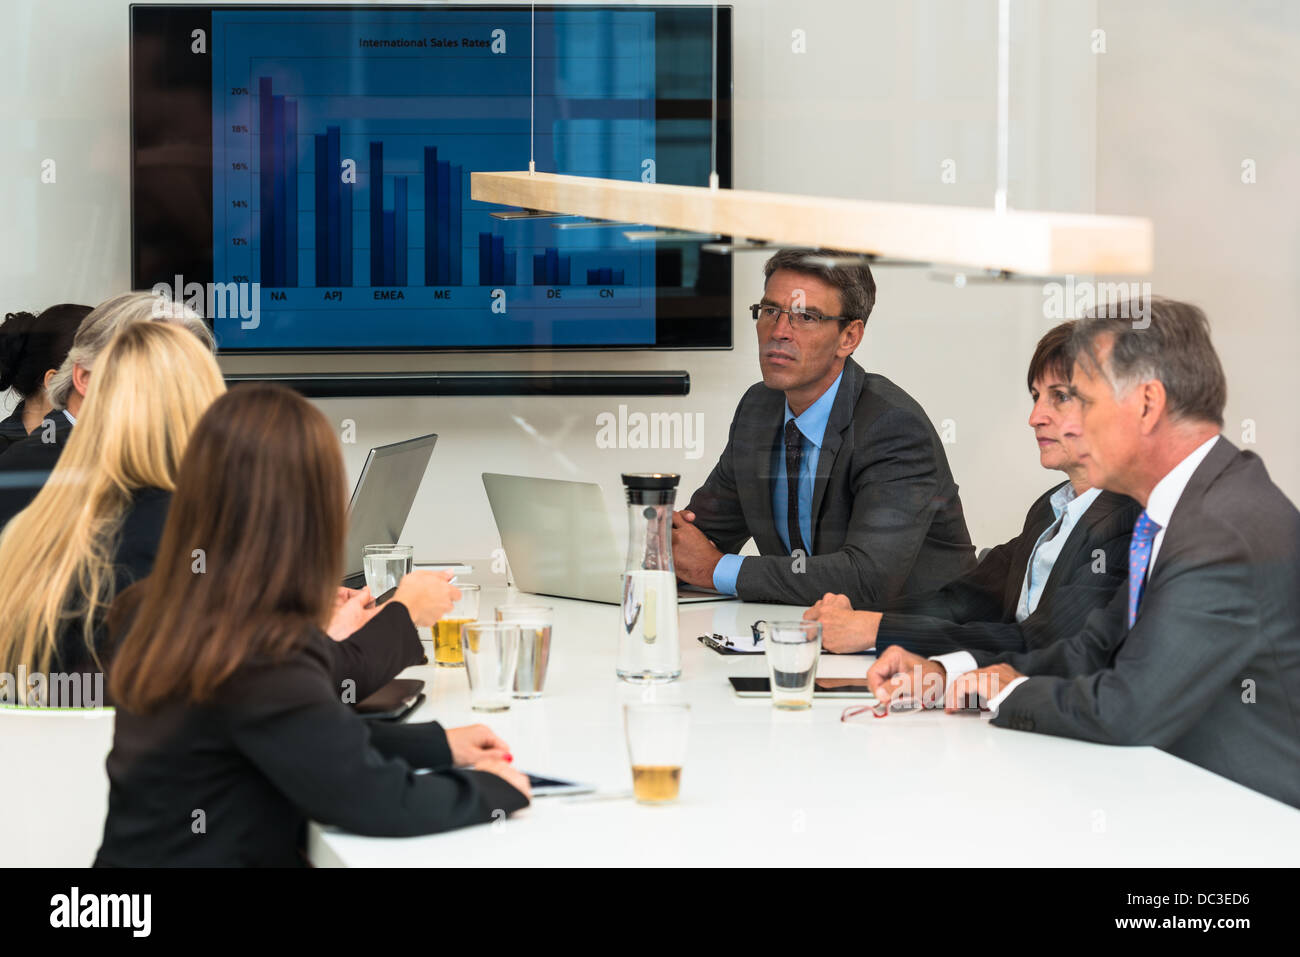 Mixed group in business meeting with laptops, projection screen, digital tablets and smartphones seen through a glass door Stock Photo